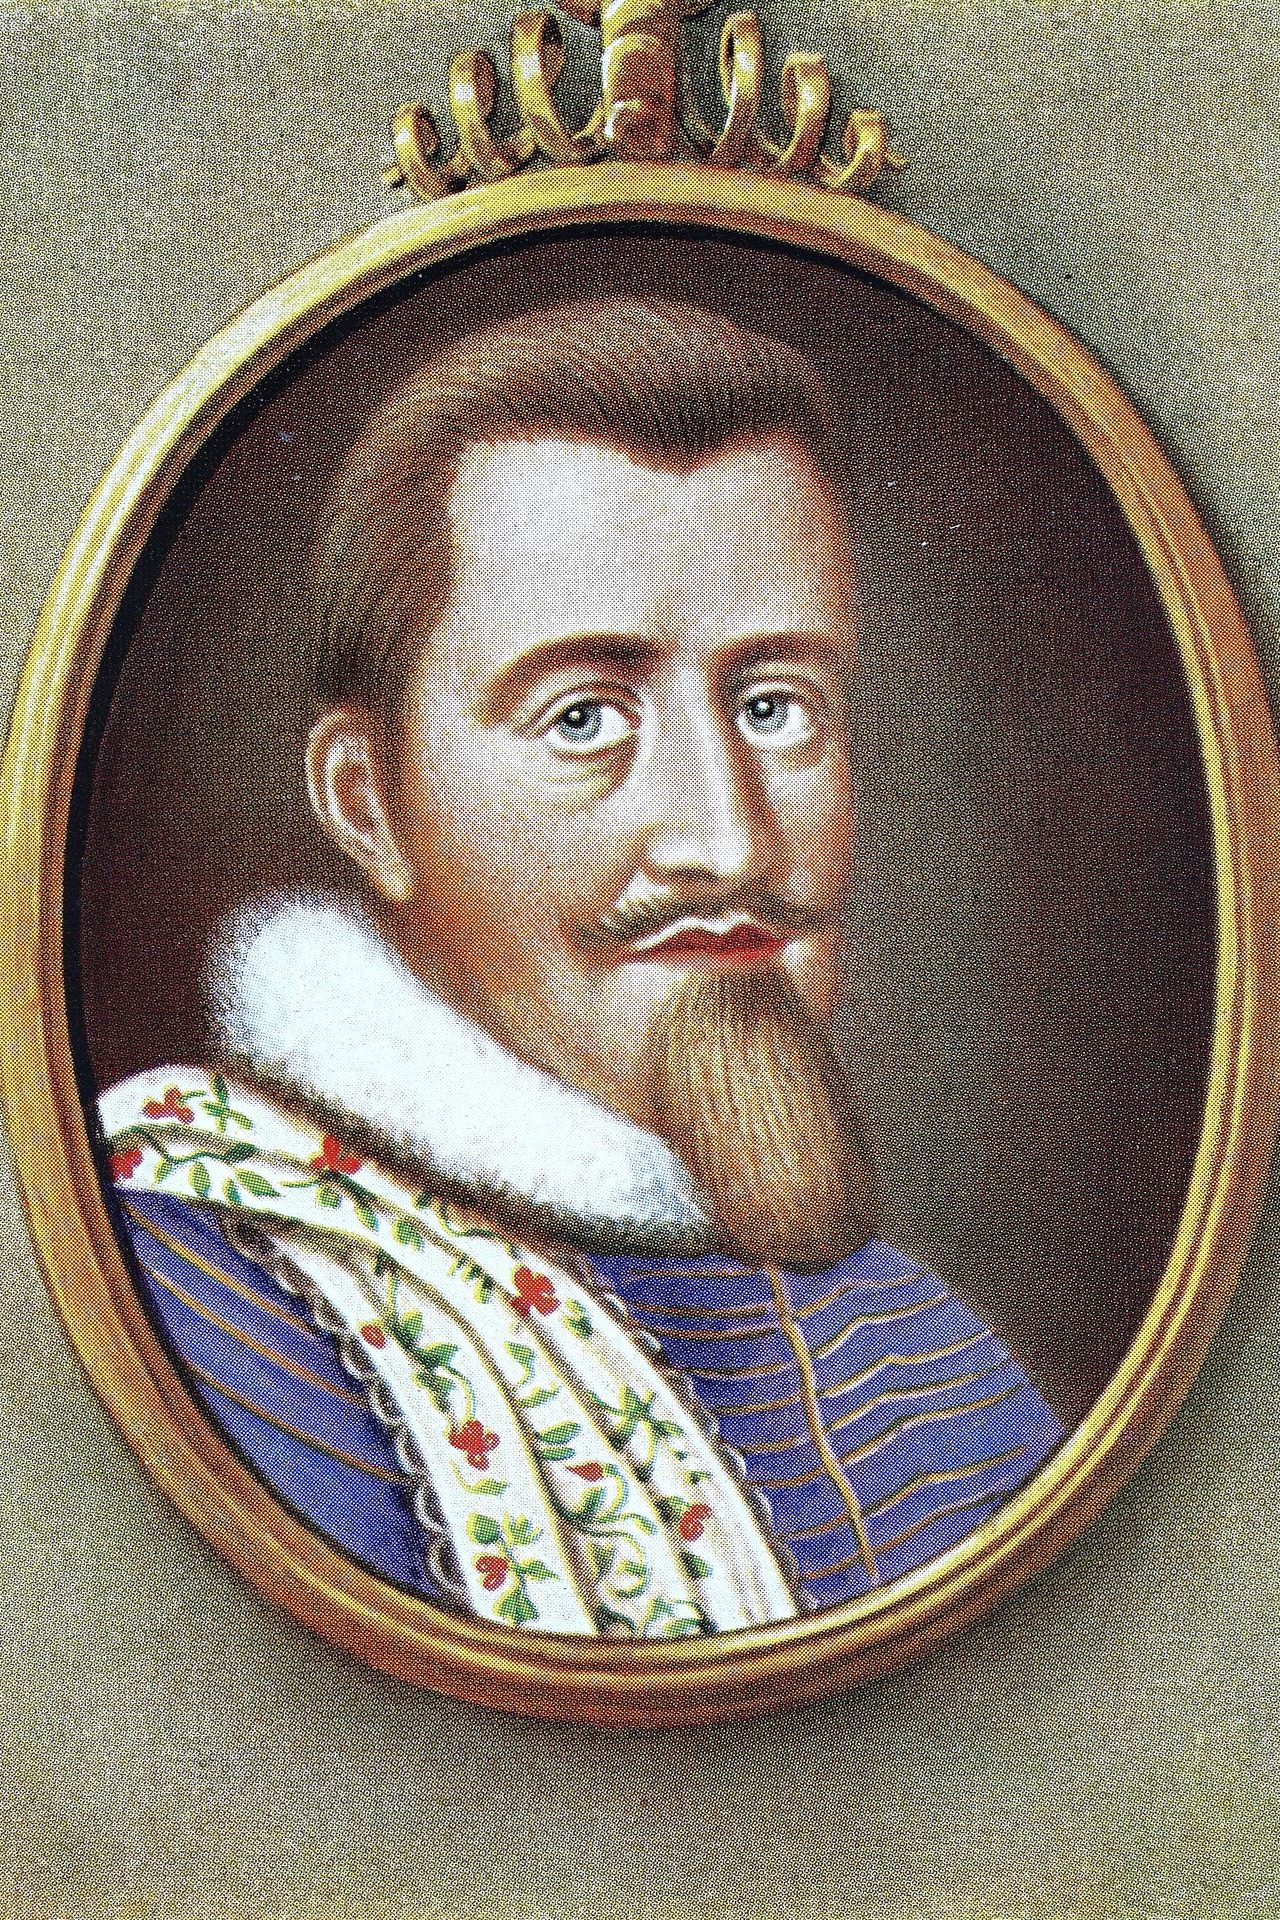 Christian IV (Denmark, 59 years from 1588 to 1648)